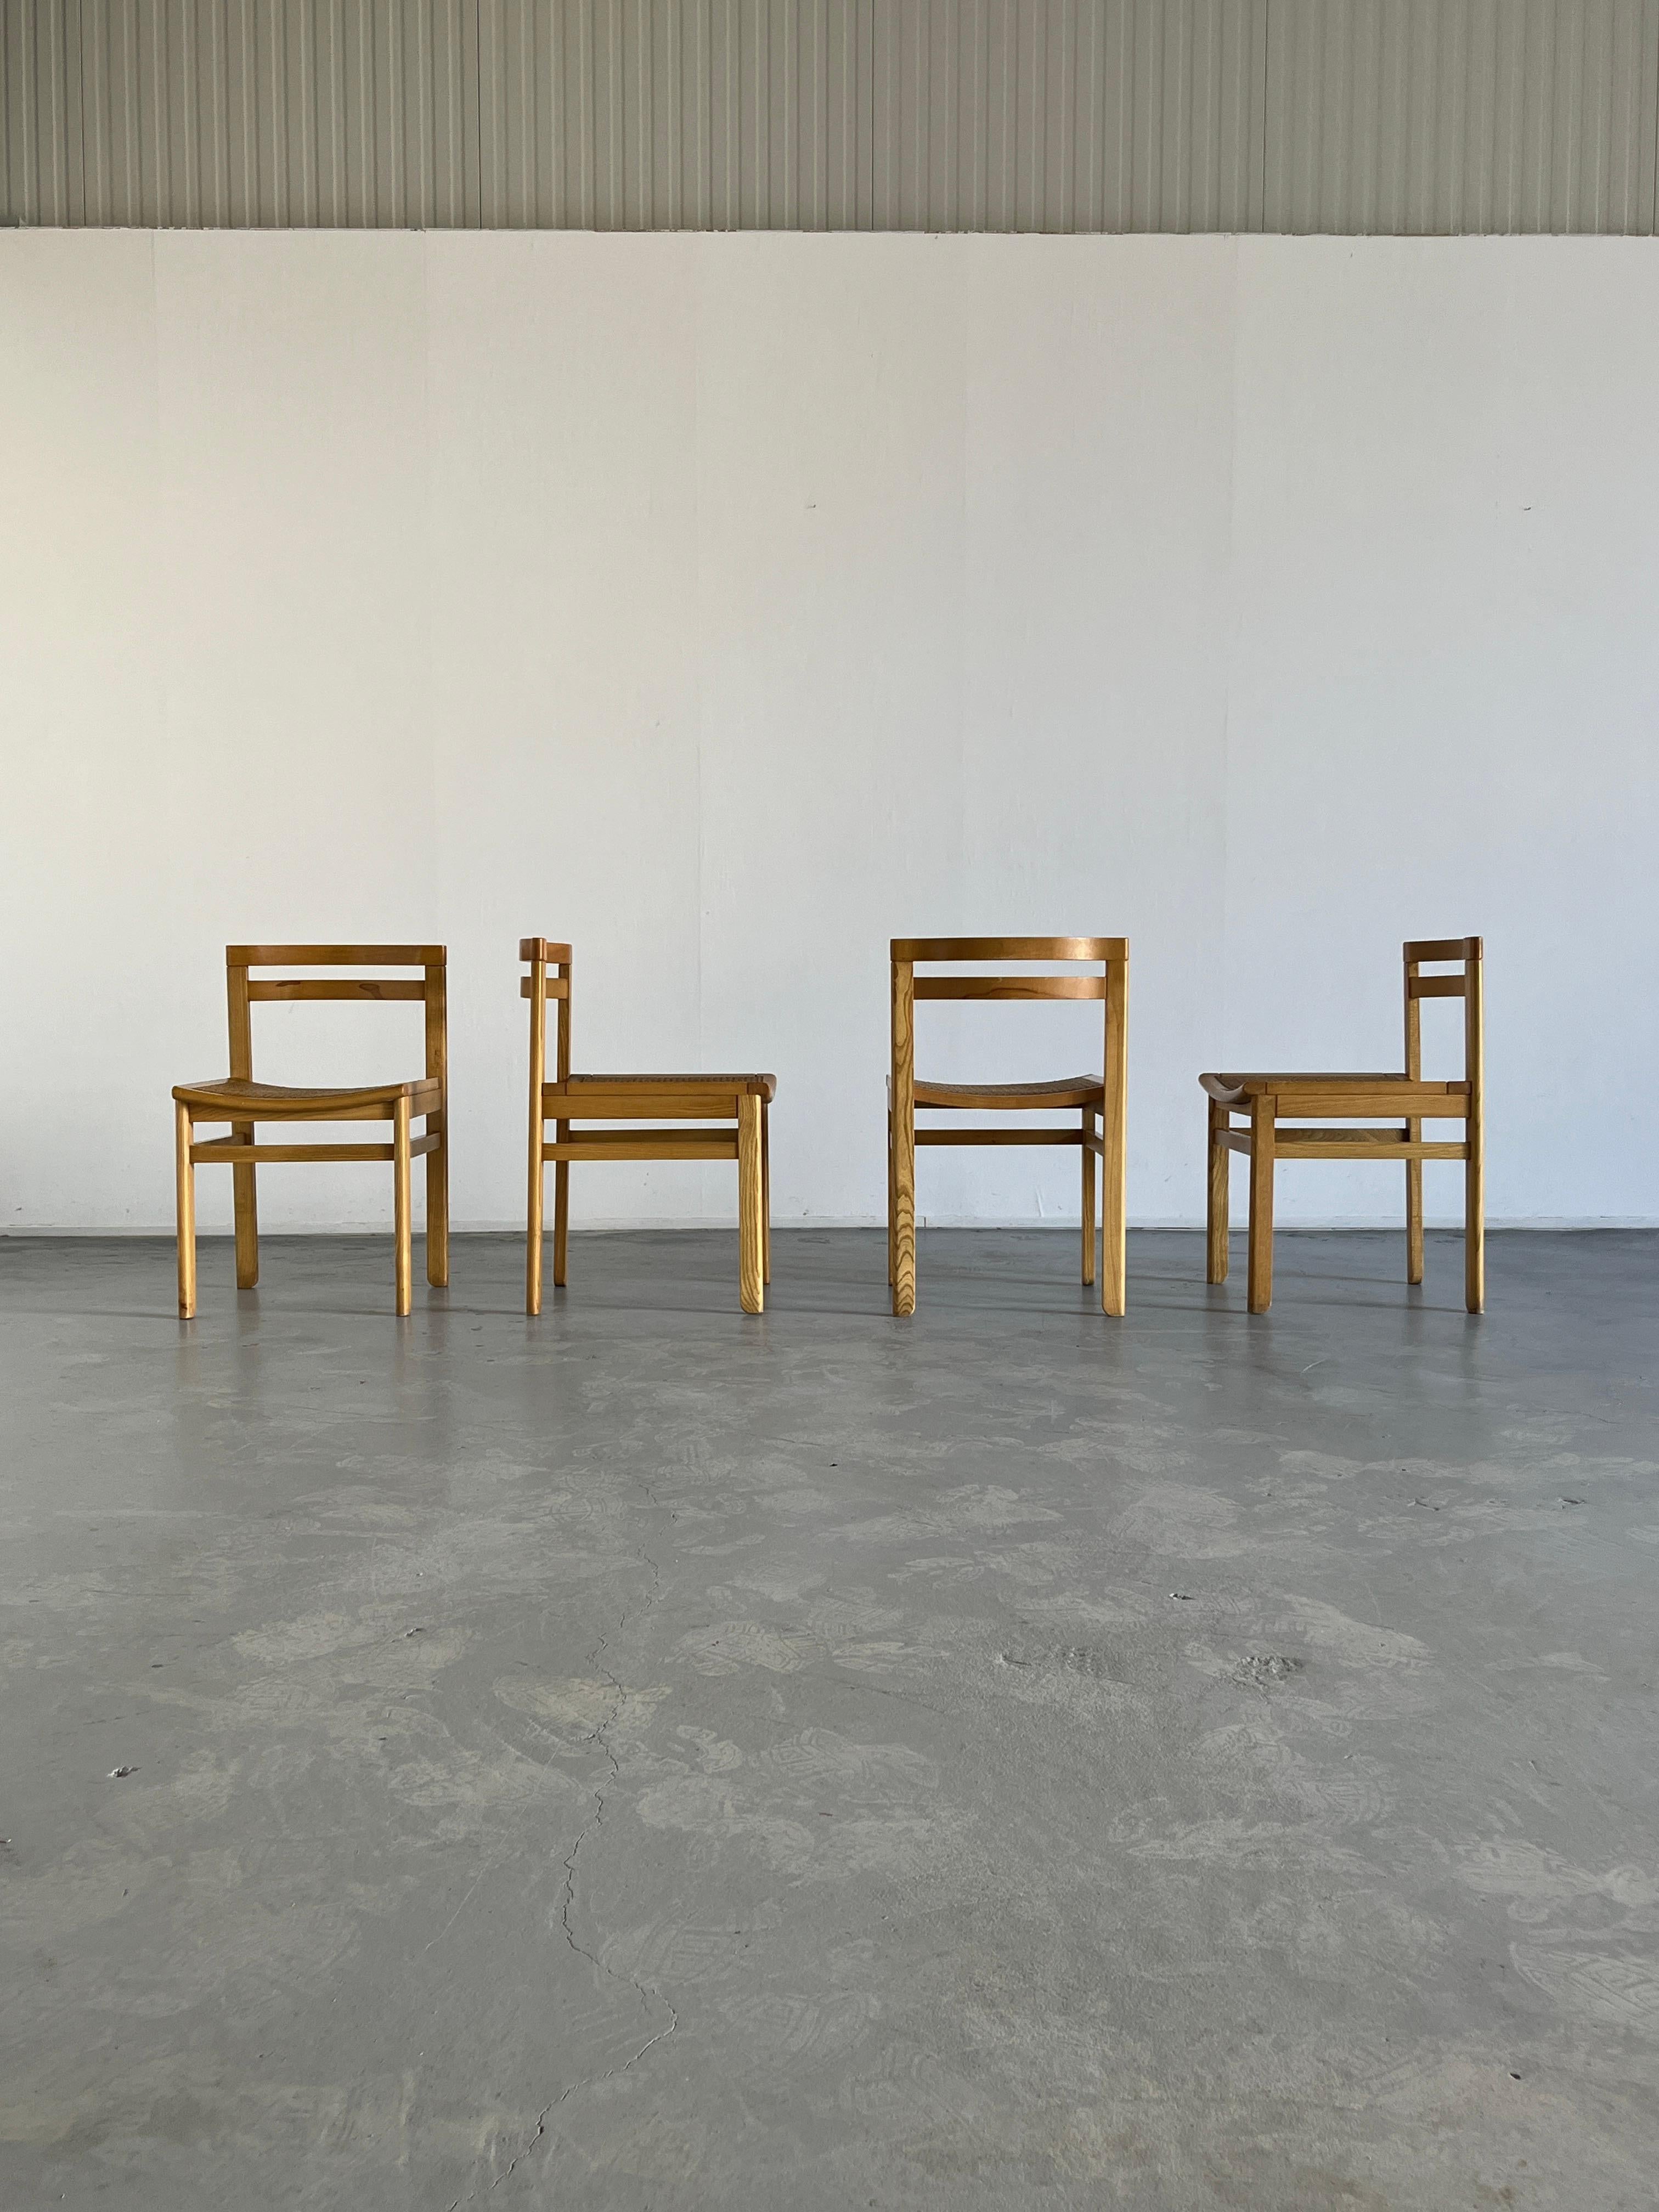 Wicker Set of 4 Mid-Century Modern Constructivist Wooden Dining Chairs in Beech, 1960s For Sale